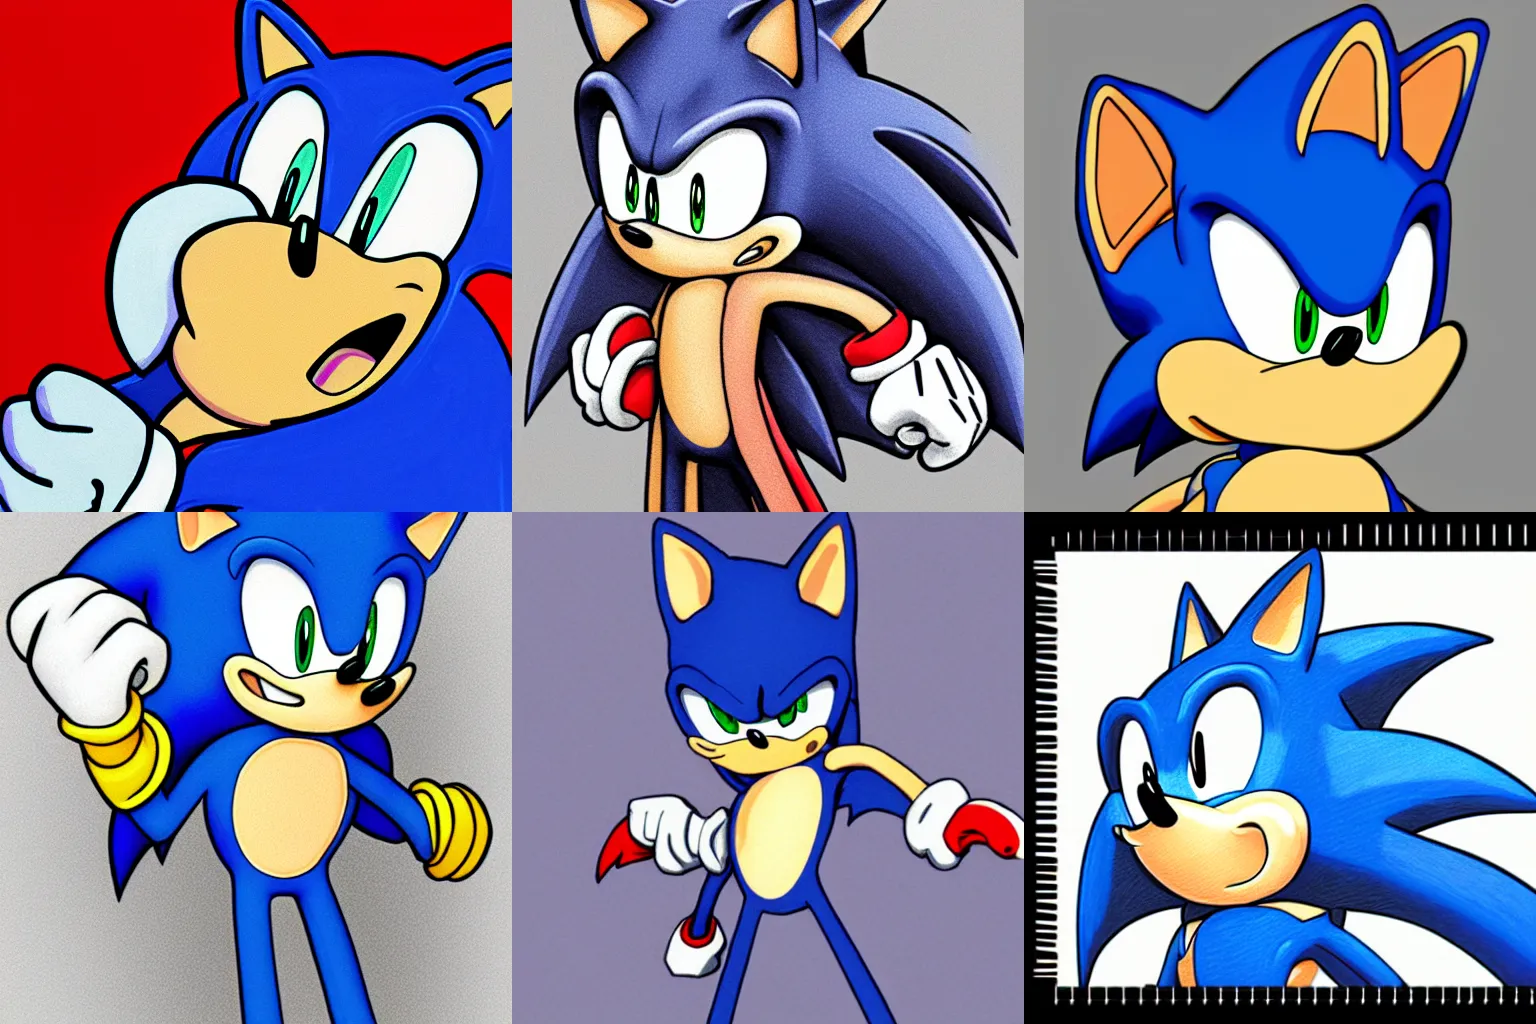 ❄️xeternalFREEZEbryx❄️ on X: Drawing Classic Sonic in different animation  styles from his origins  / X